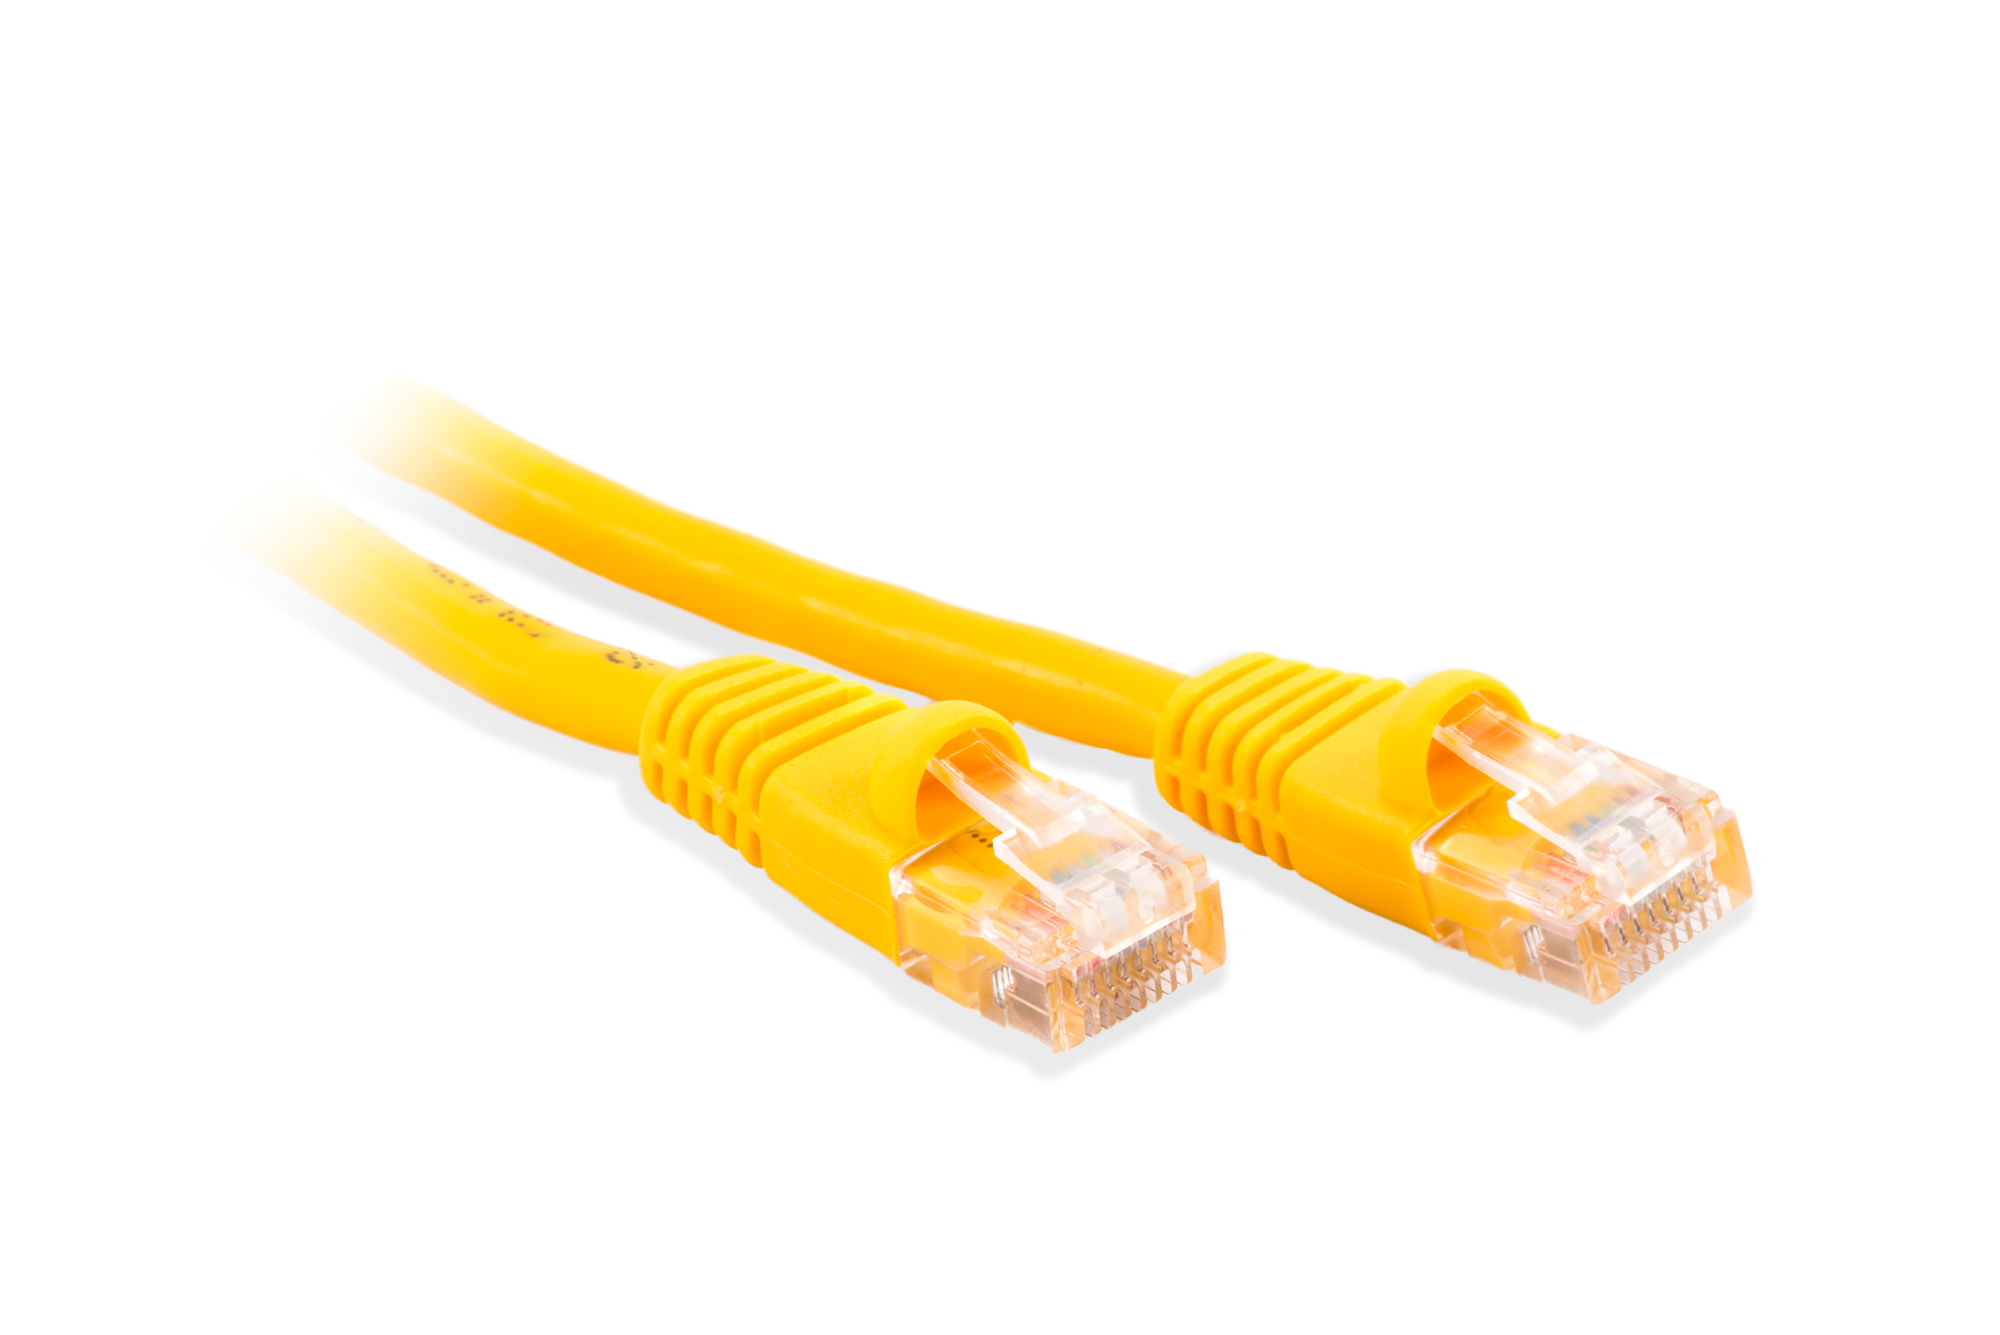 5ft Cat6 Ethernet Patch Cable - Yellow Color - Snagless Boot